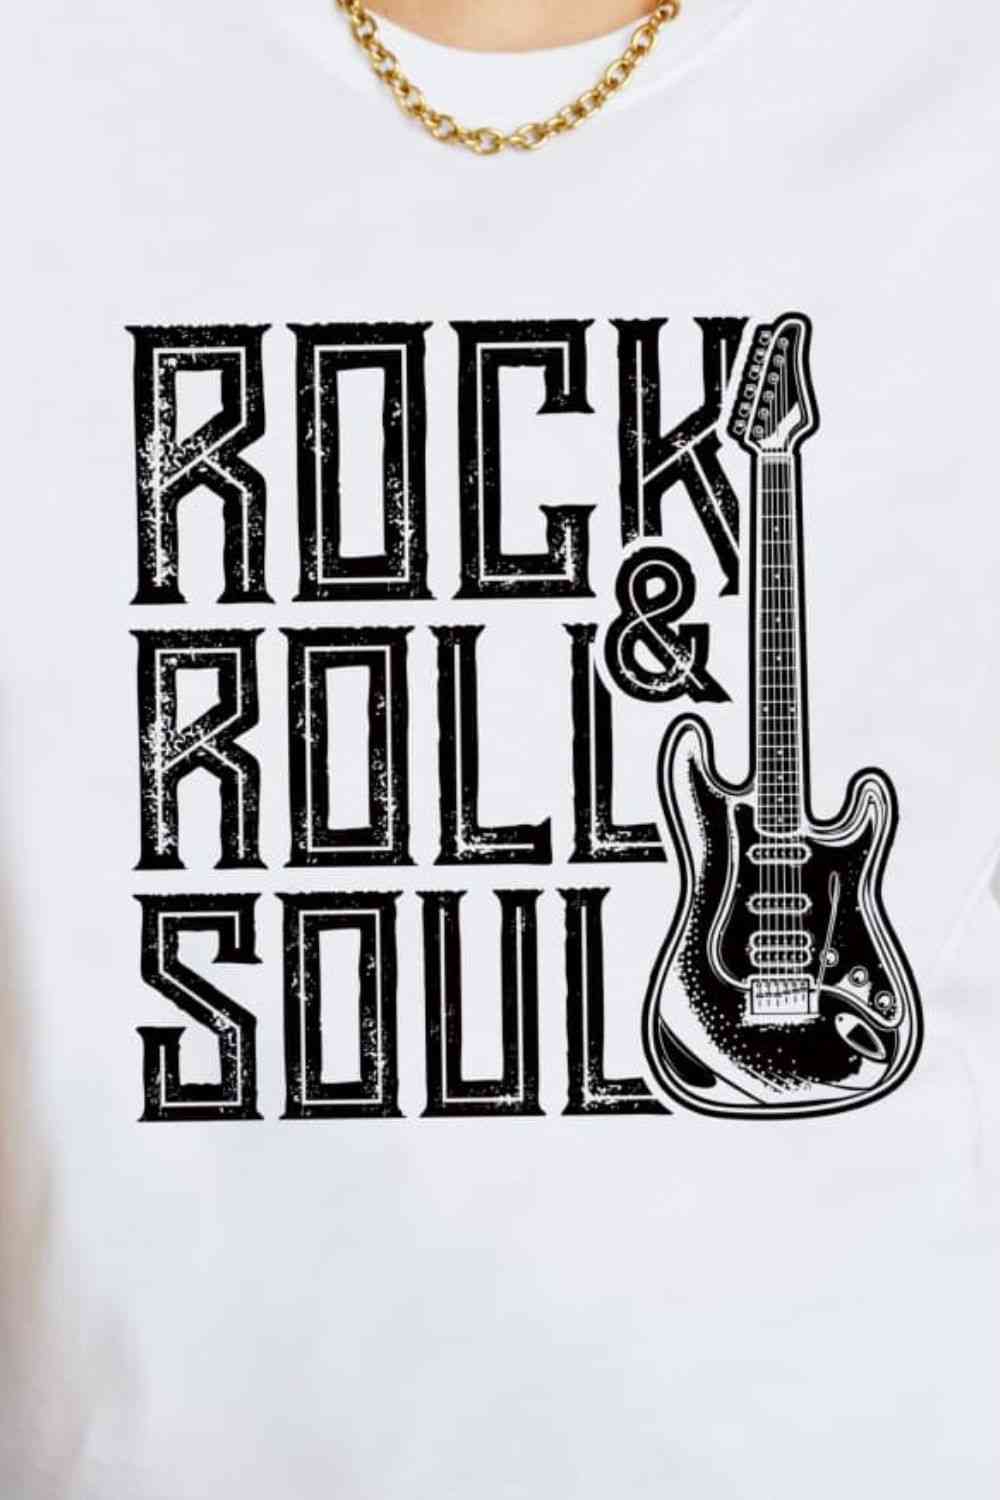 Simply Love Full Size ROCK & ROLL SOUL Graphic Cotton T-Shirt